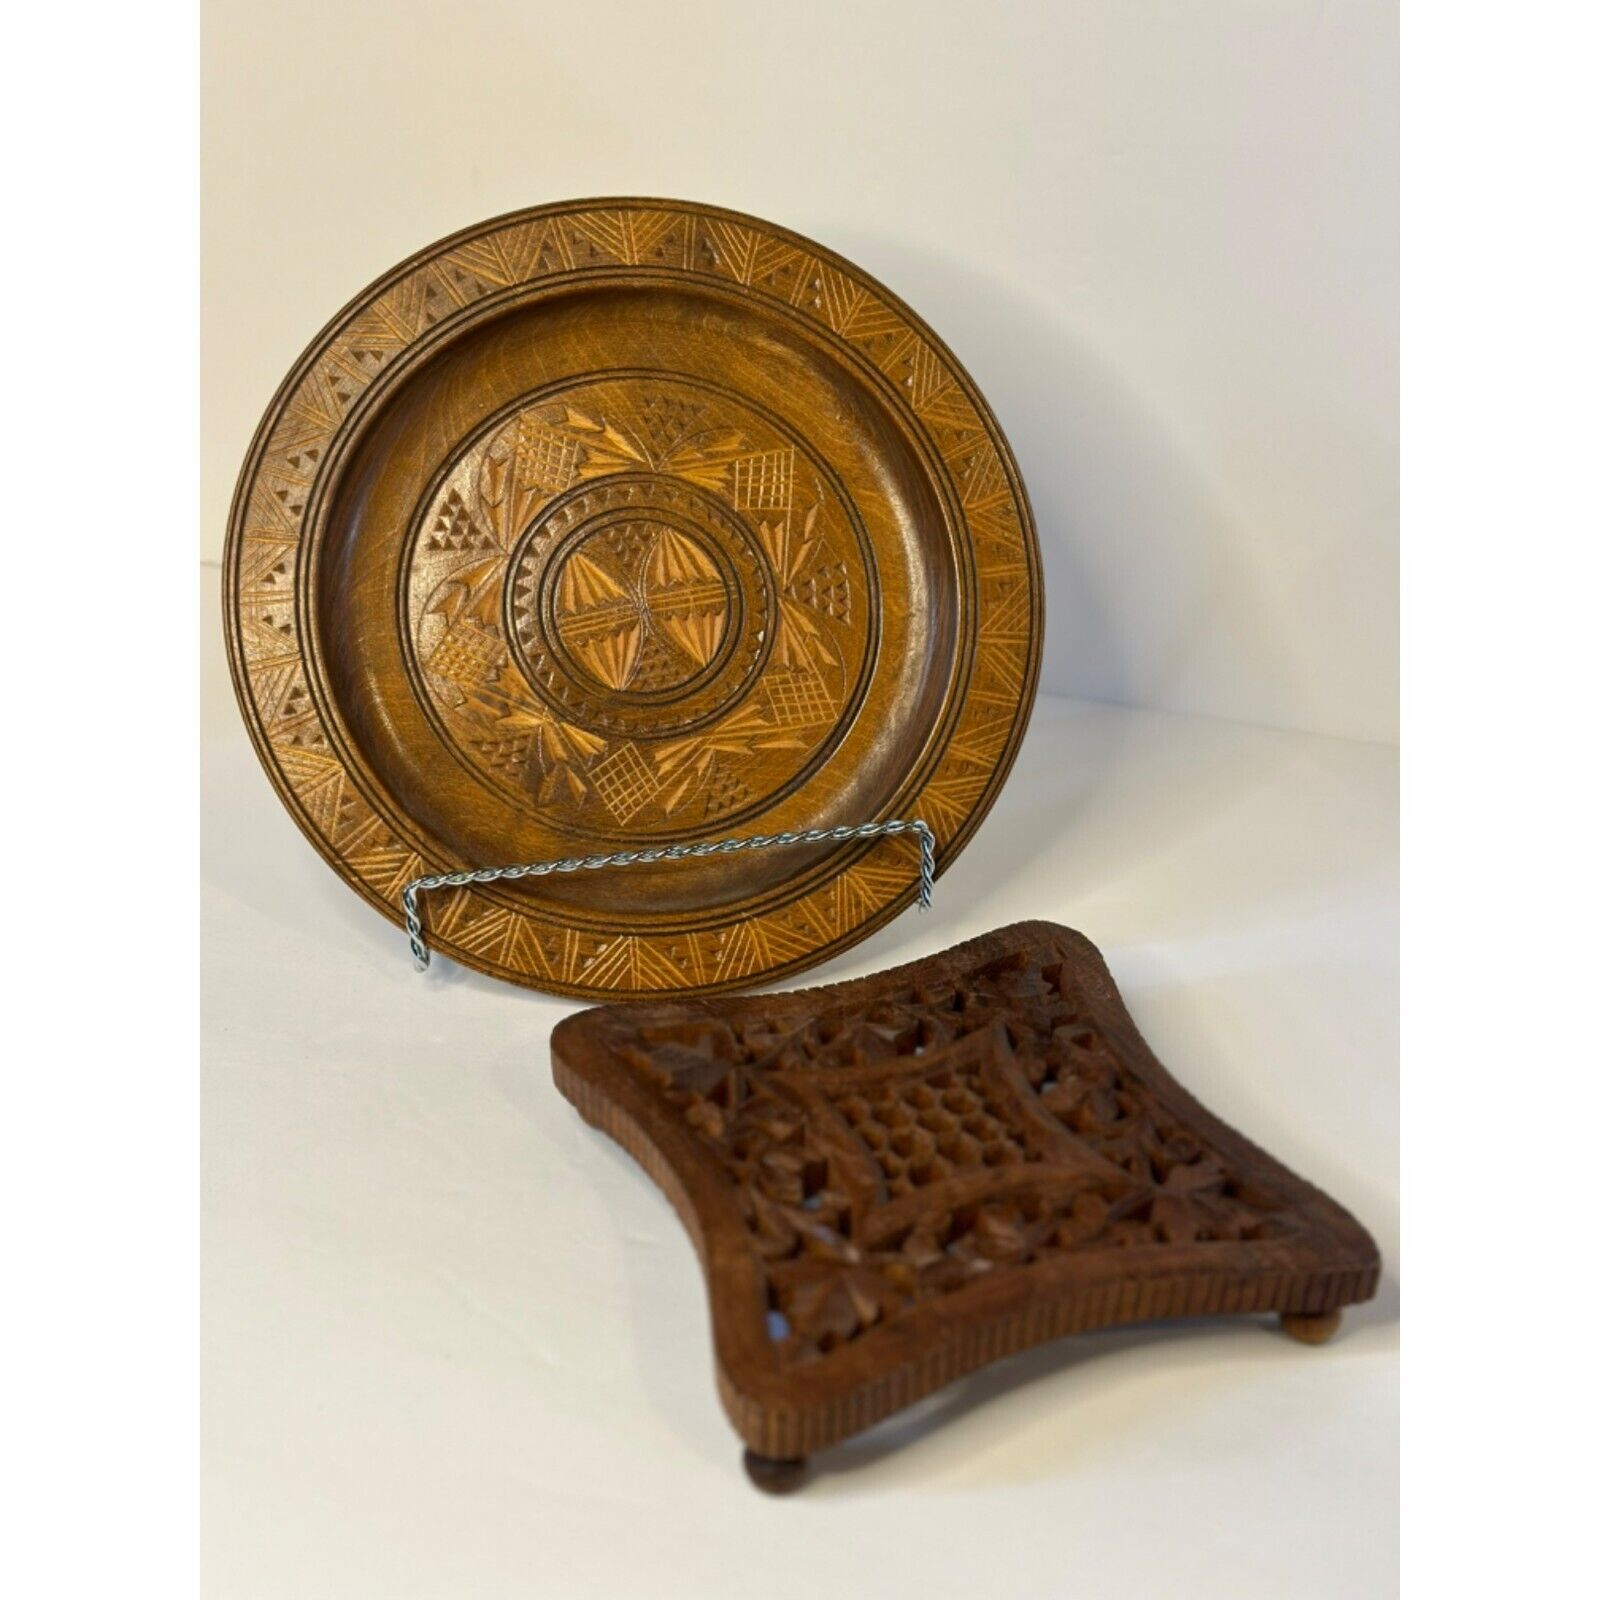 VTG 70‘s Hand Carved Wooden Wall Plate Bohemian - Rustic Home & Wooden Trivet